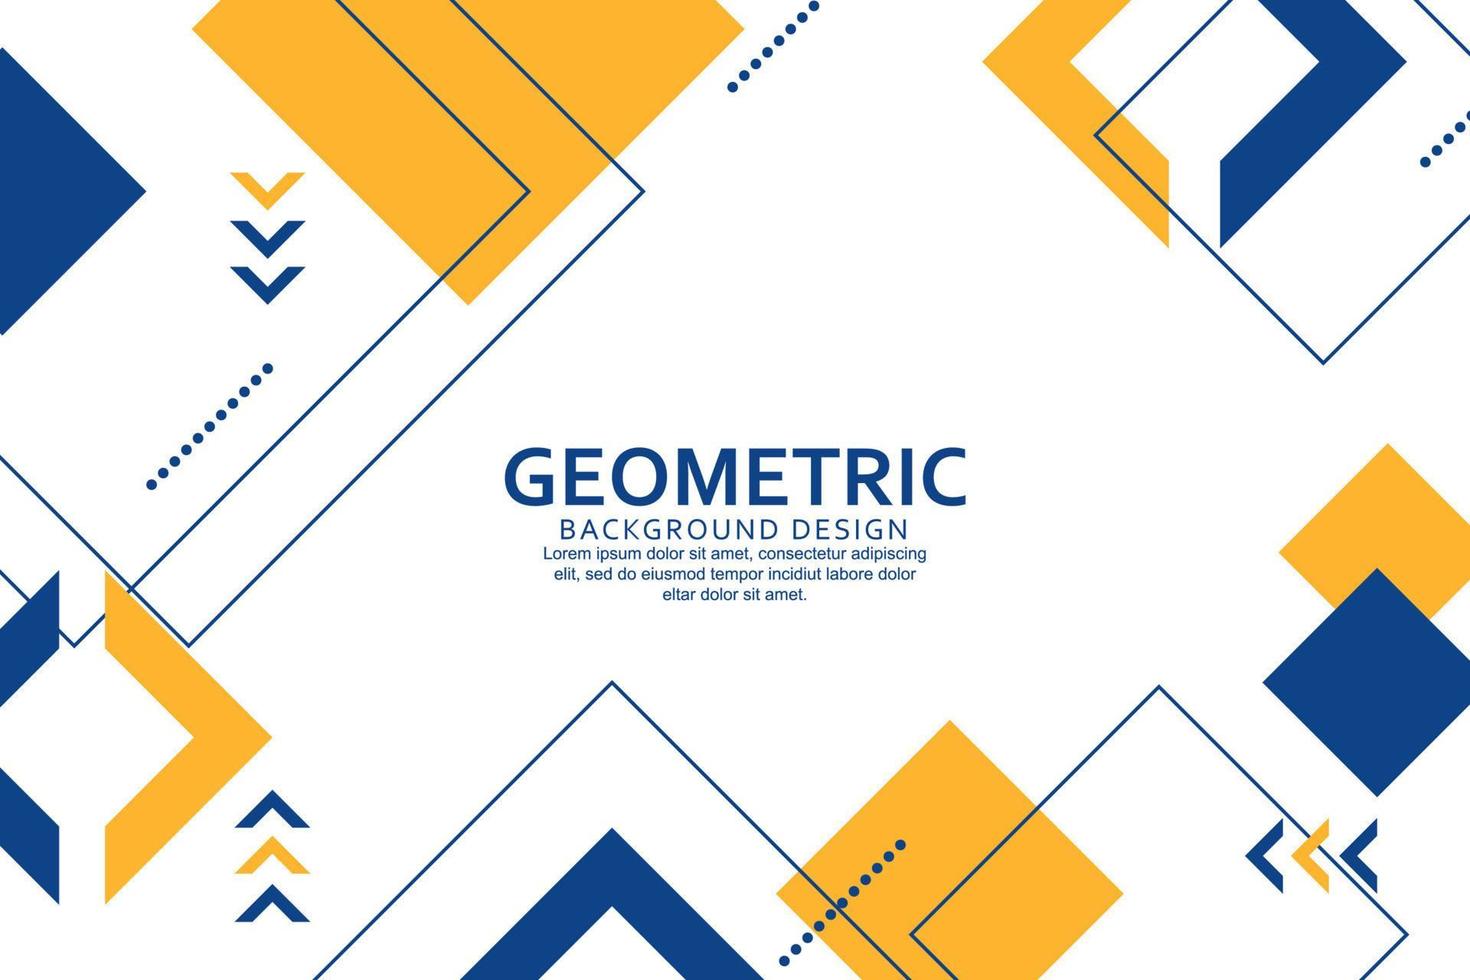 Geometric background with abstract shapes design vector